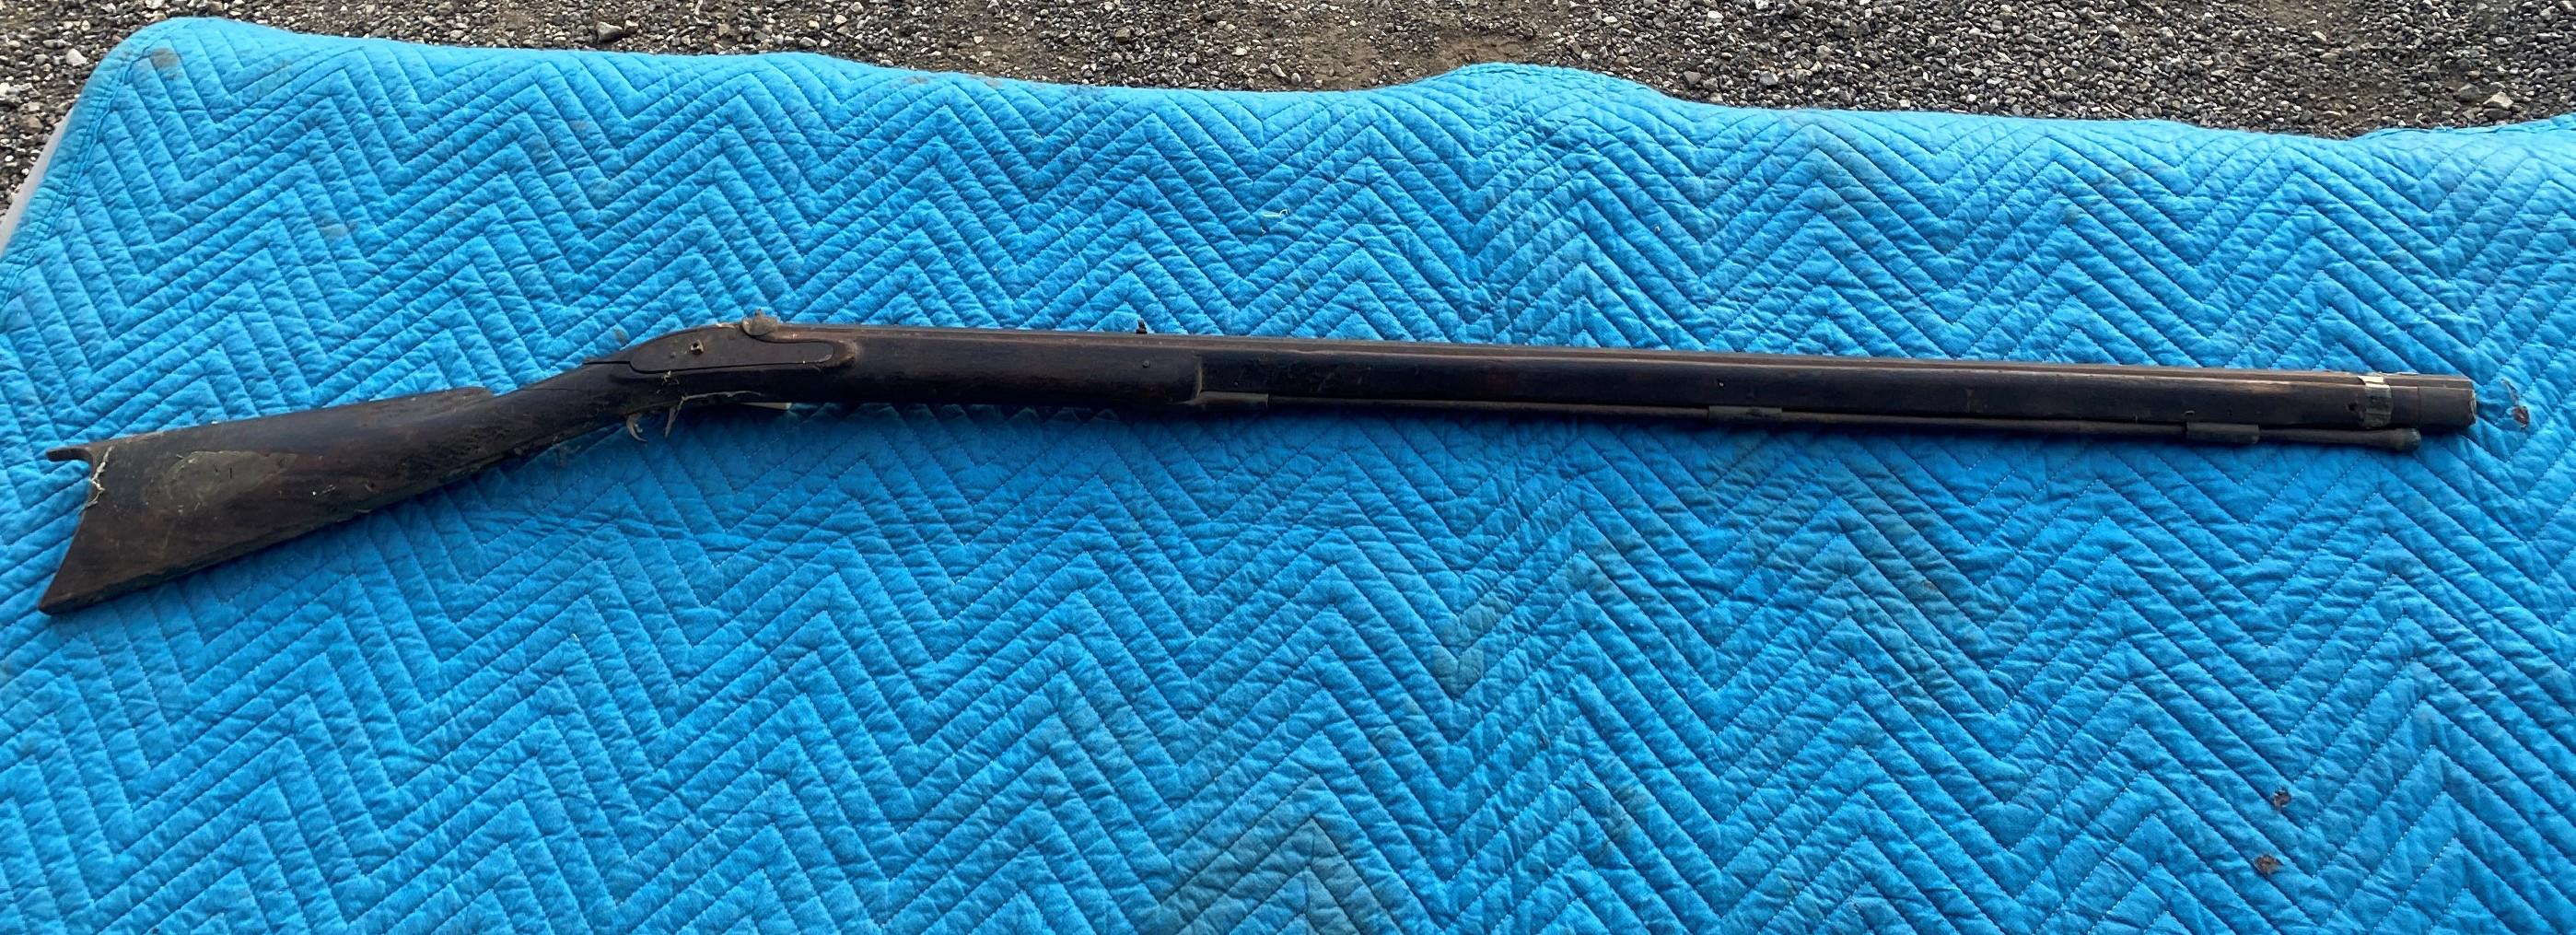 Percussion Full Stock Rifle by JH Johnston Great Western Gun Works Pittsburgh, PA